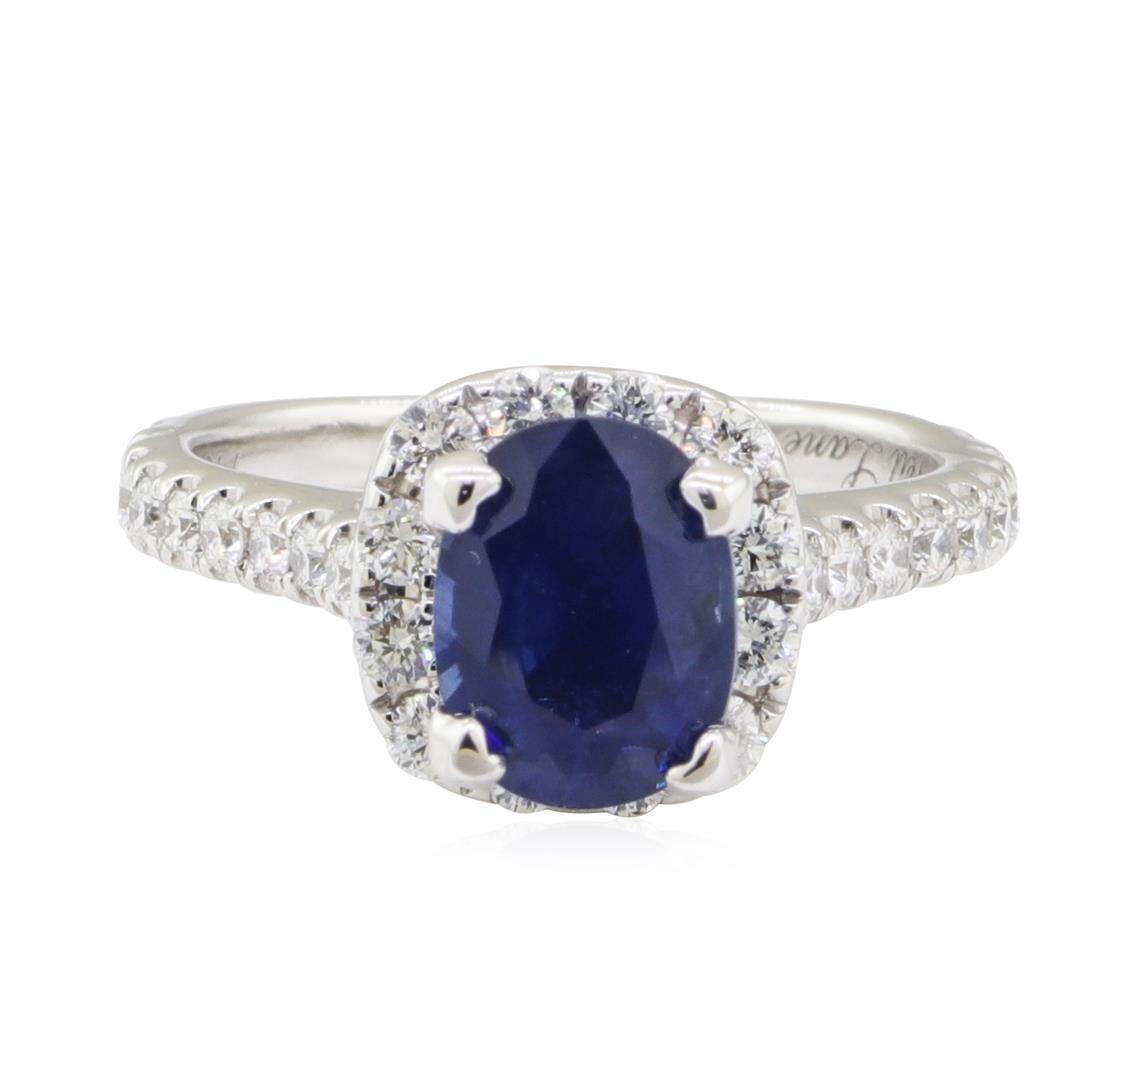 2.41 ctw Sapphire and Diamond Ring - 14KT White Gold